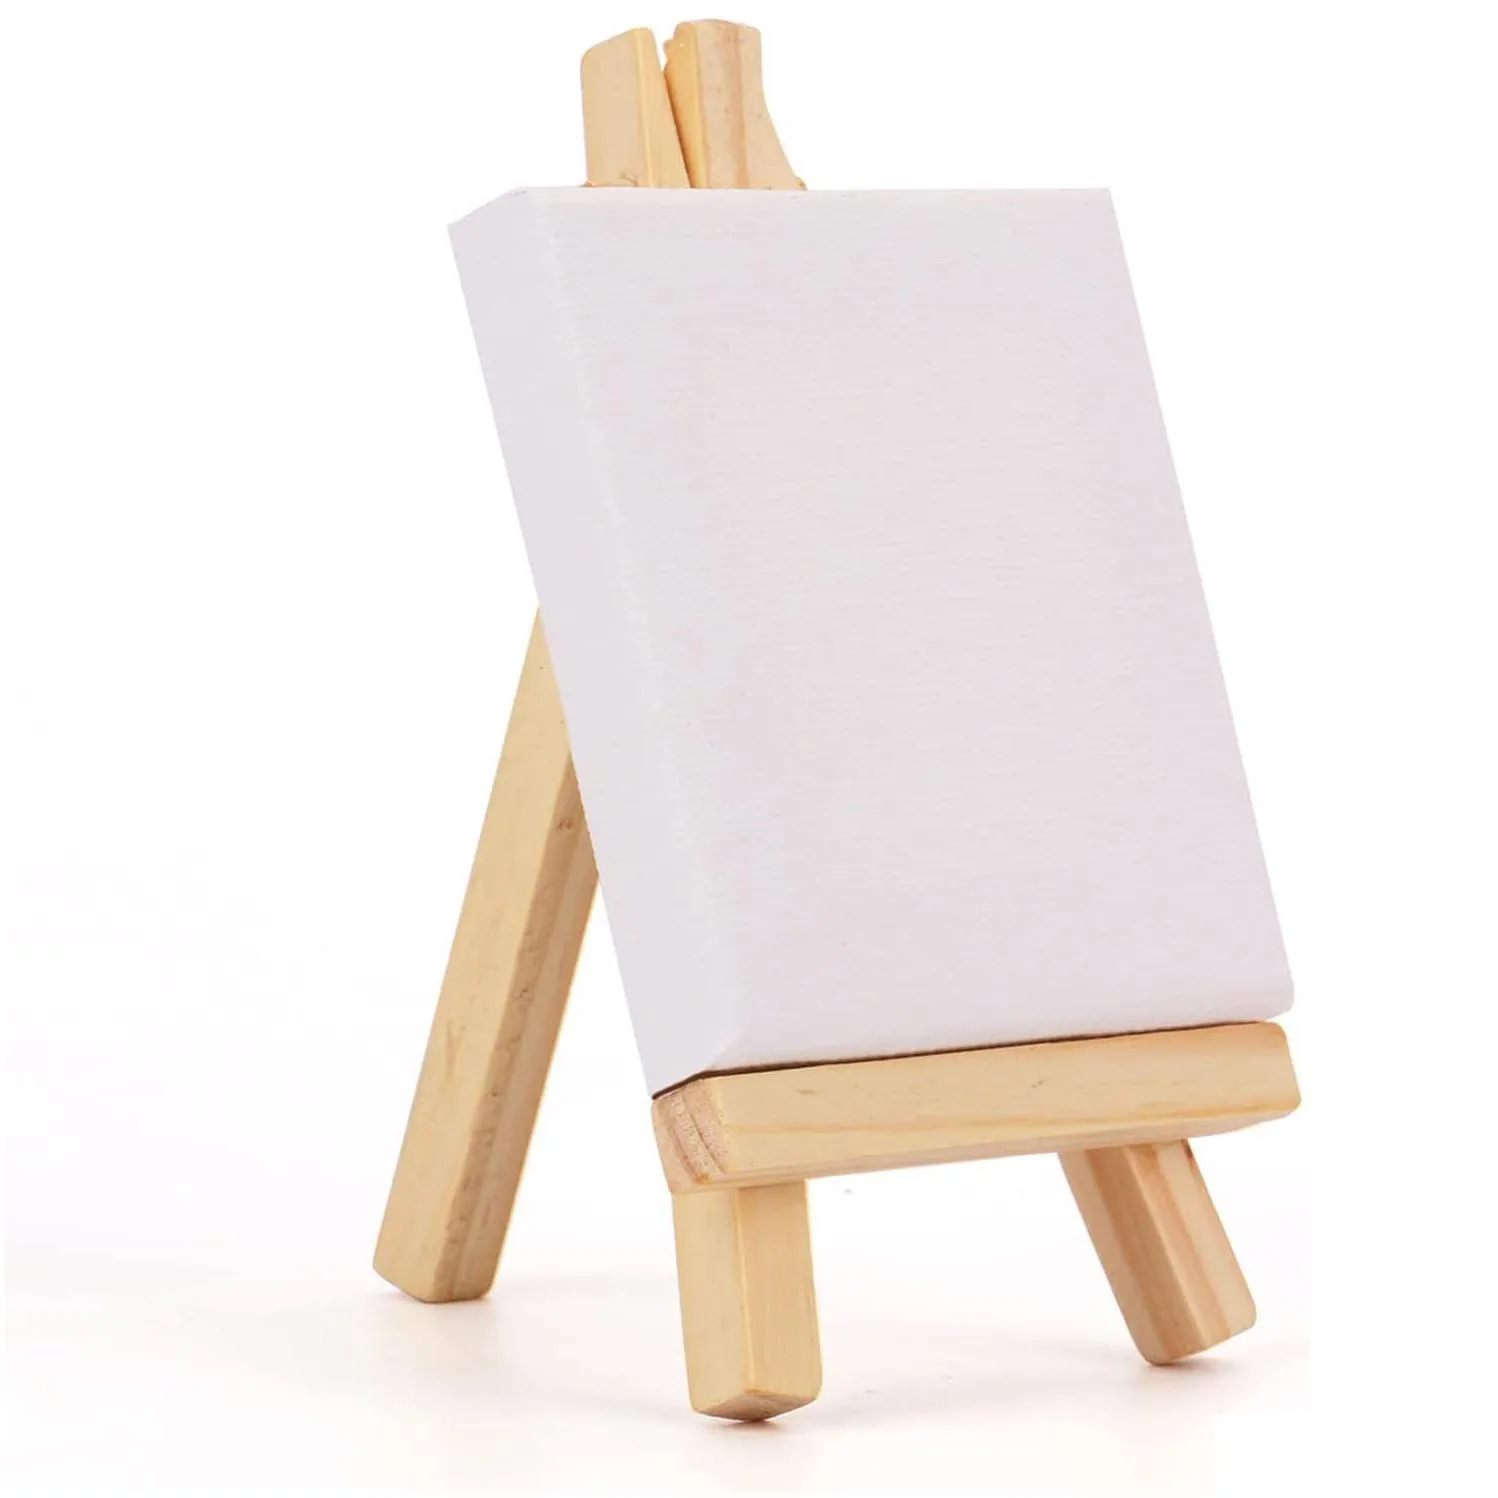 Painting Supplies 3 Canvas With Mini Wood Display Easel Artist Tripod Tabletop Holder Stand For Painting Kids Crafts Pos Kdjk2302 Home Dhfwt